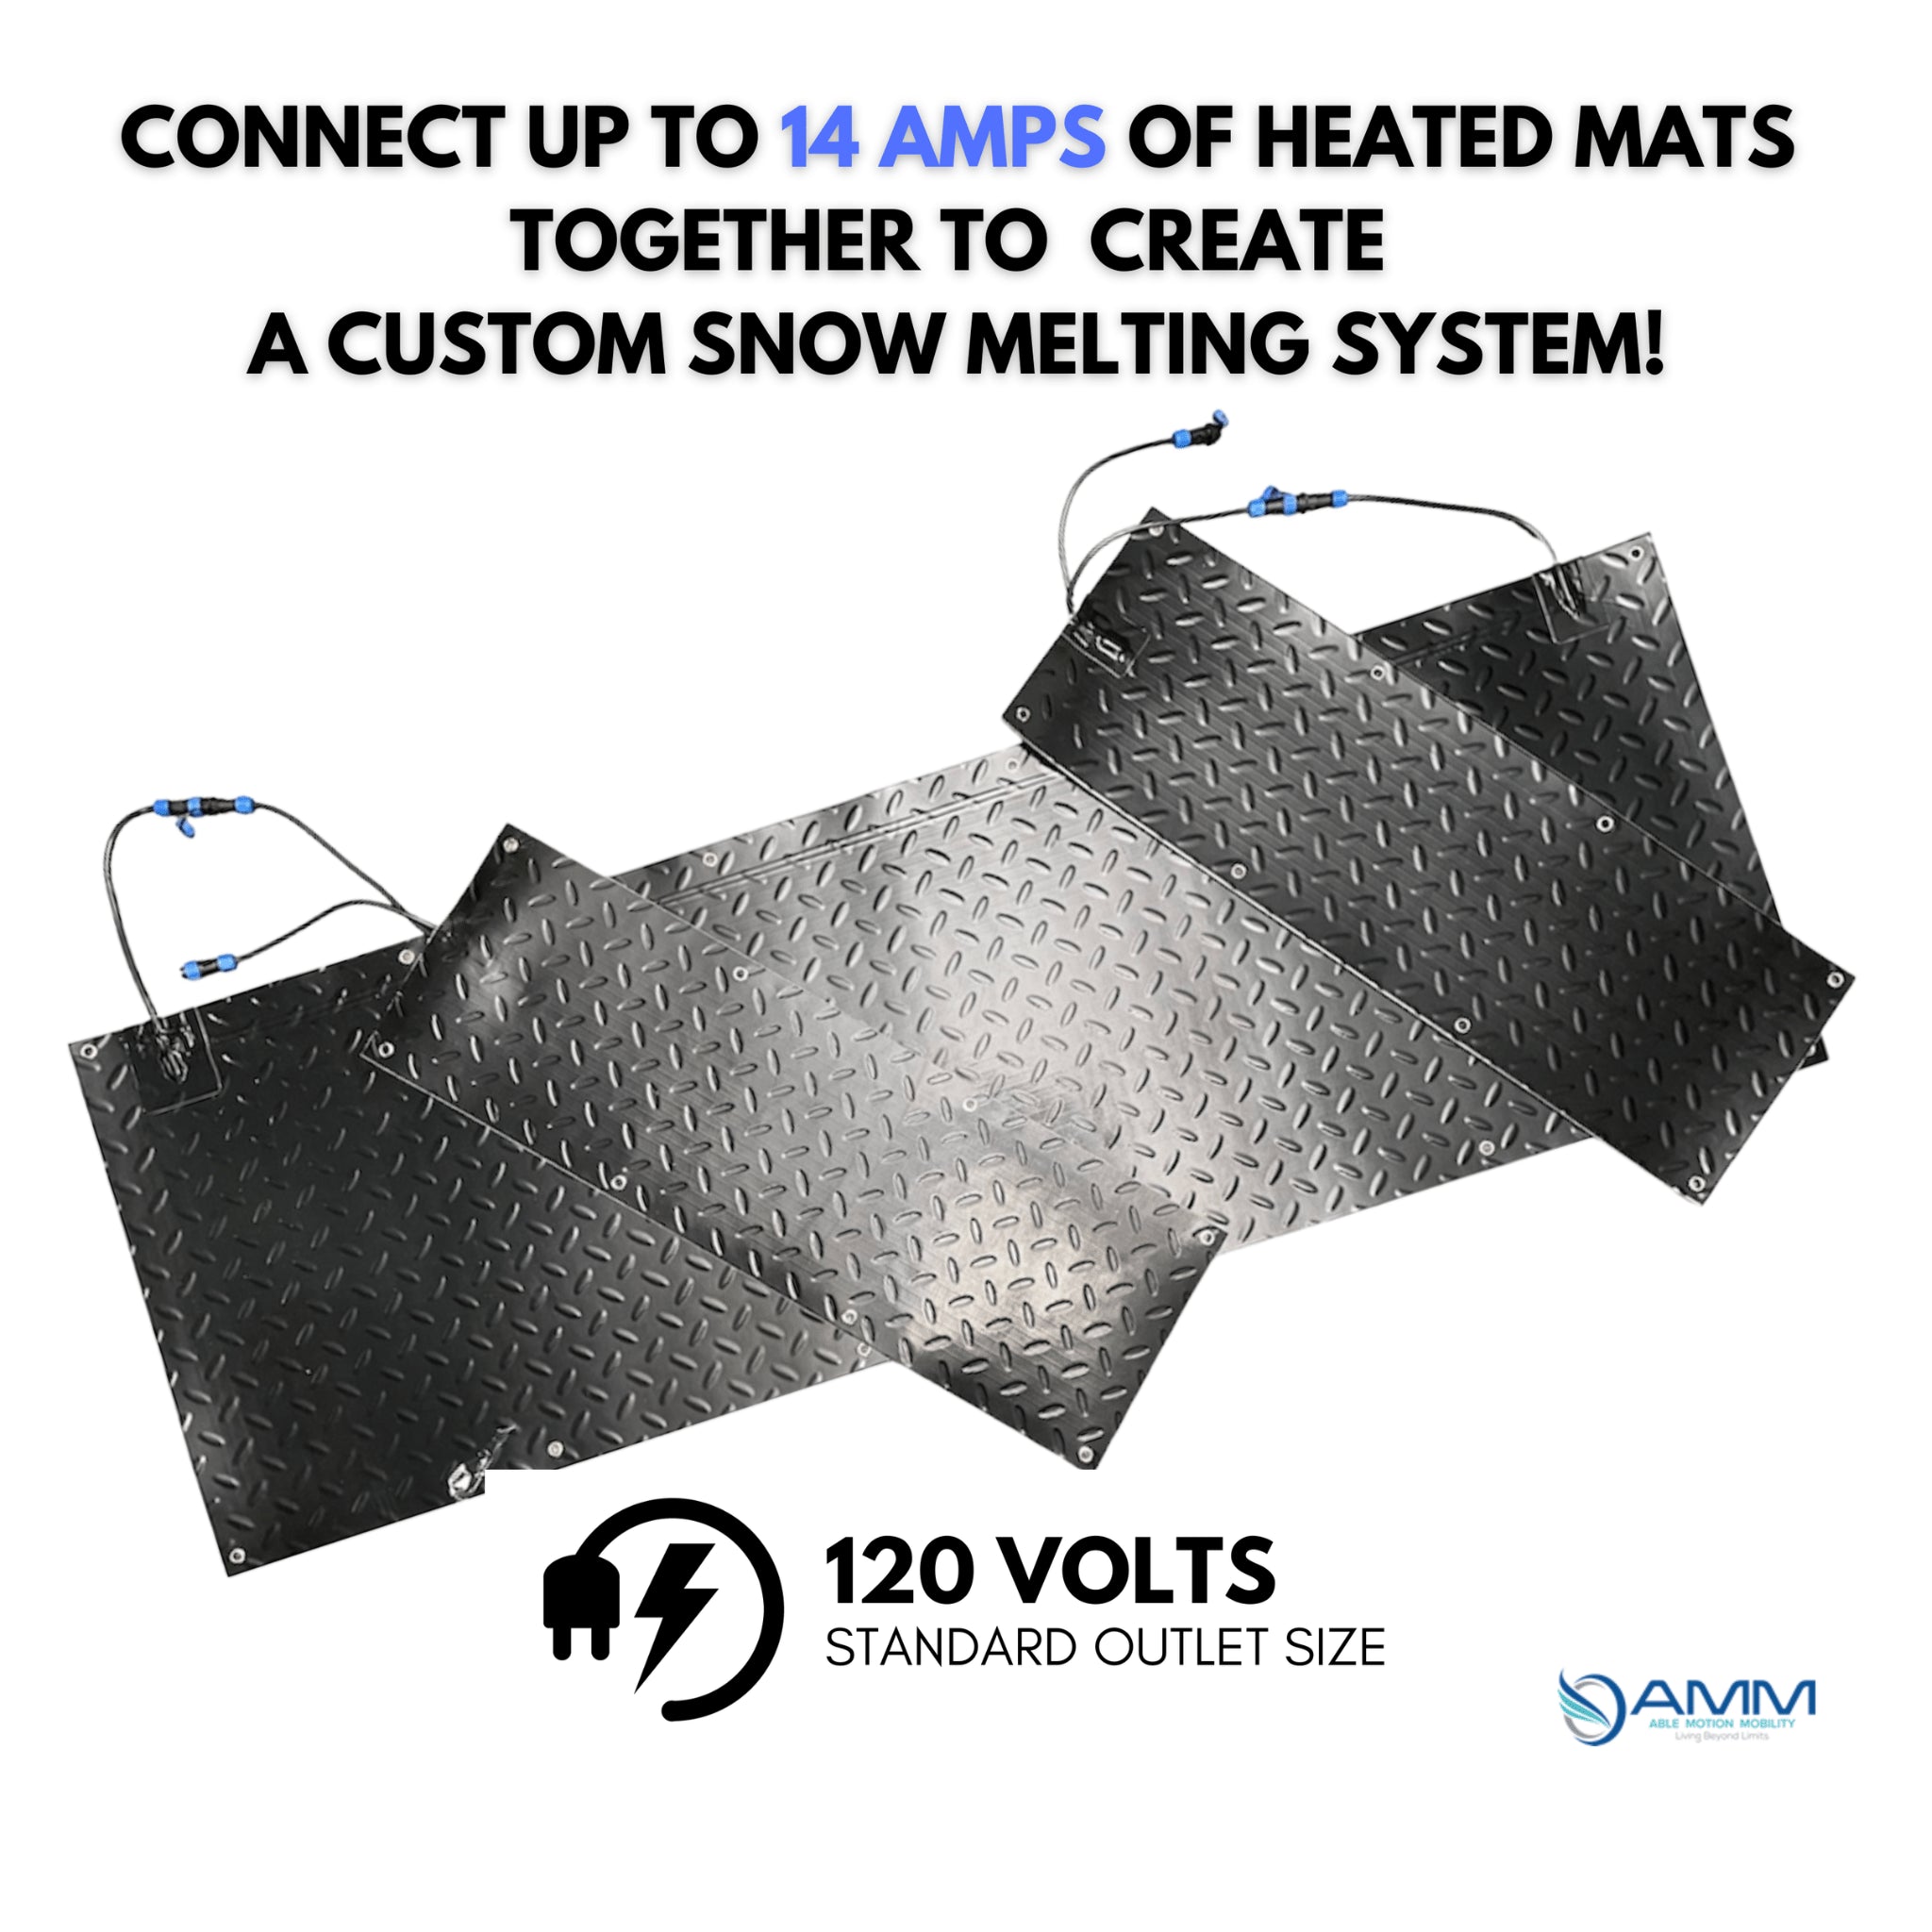 Able Motion Mobility: High-Quality Heated Door Mats for Safe Winter Footing